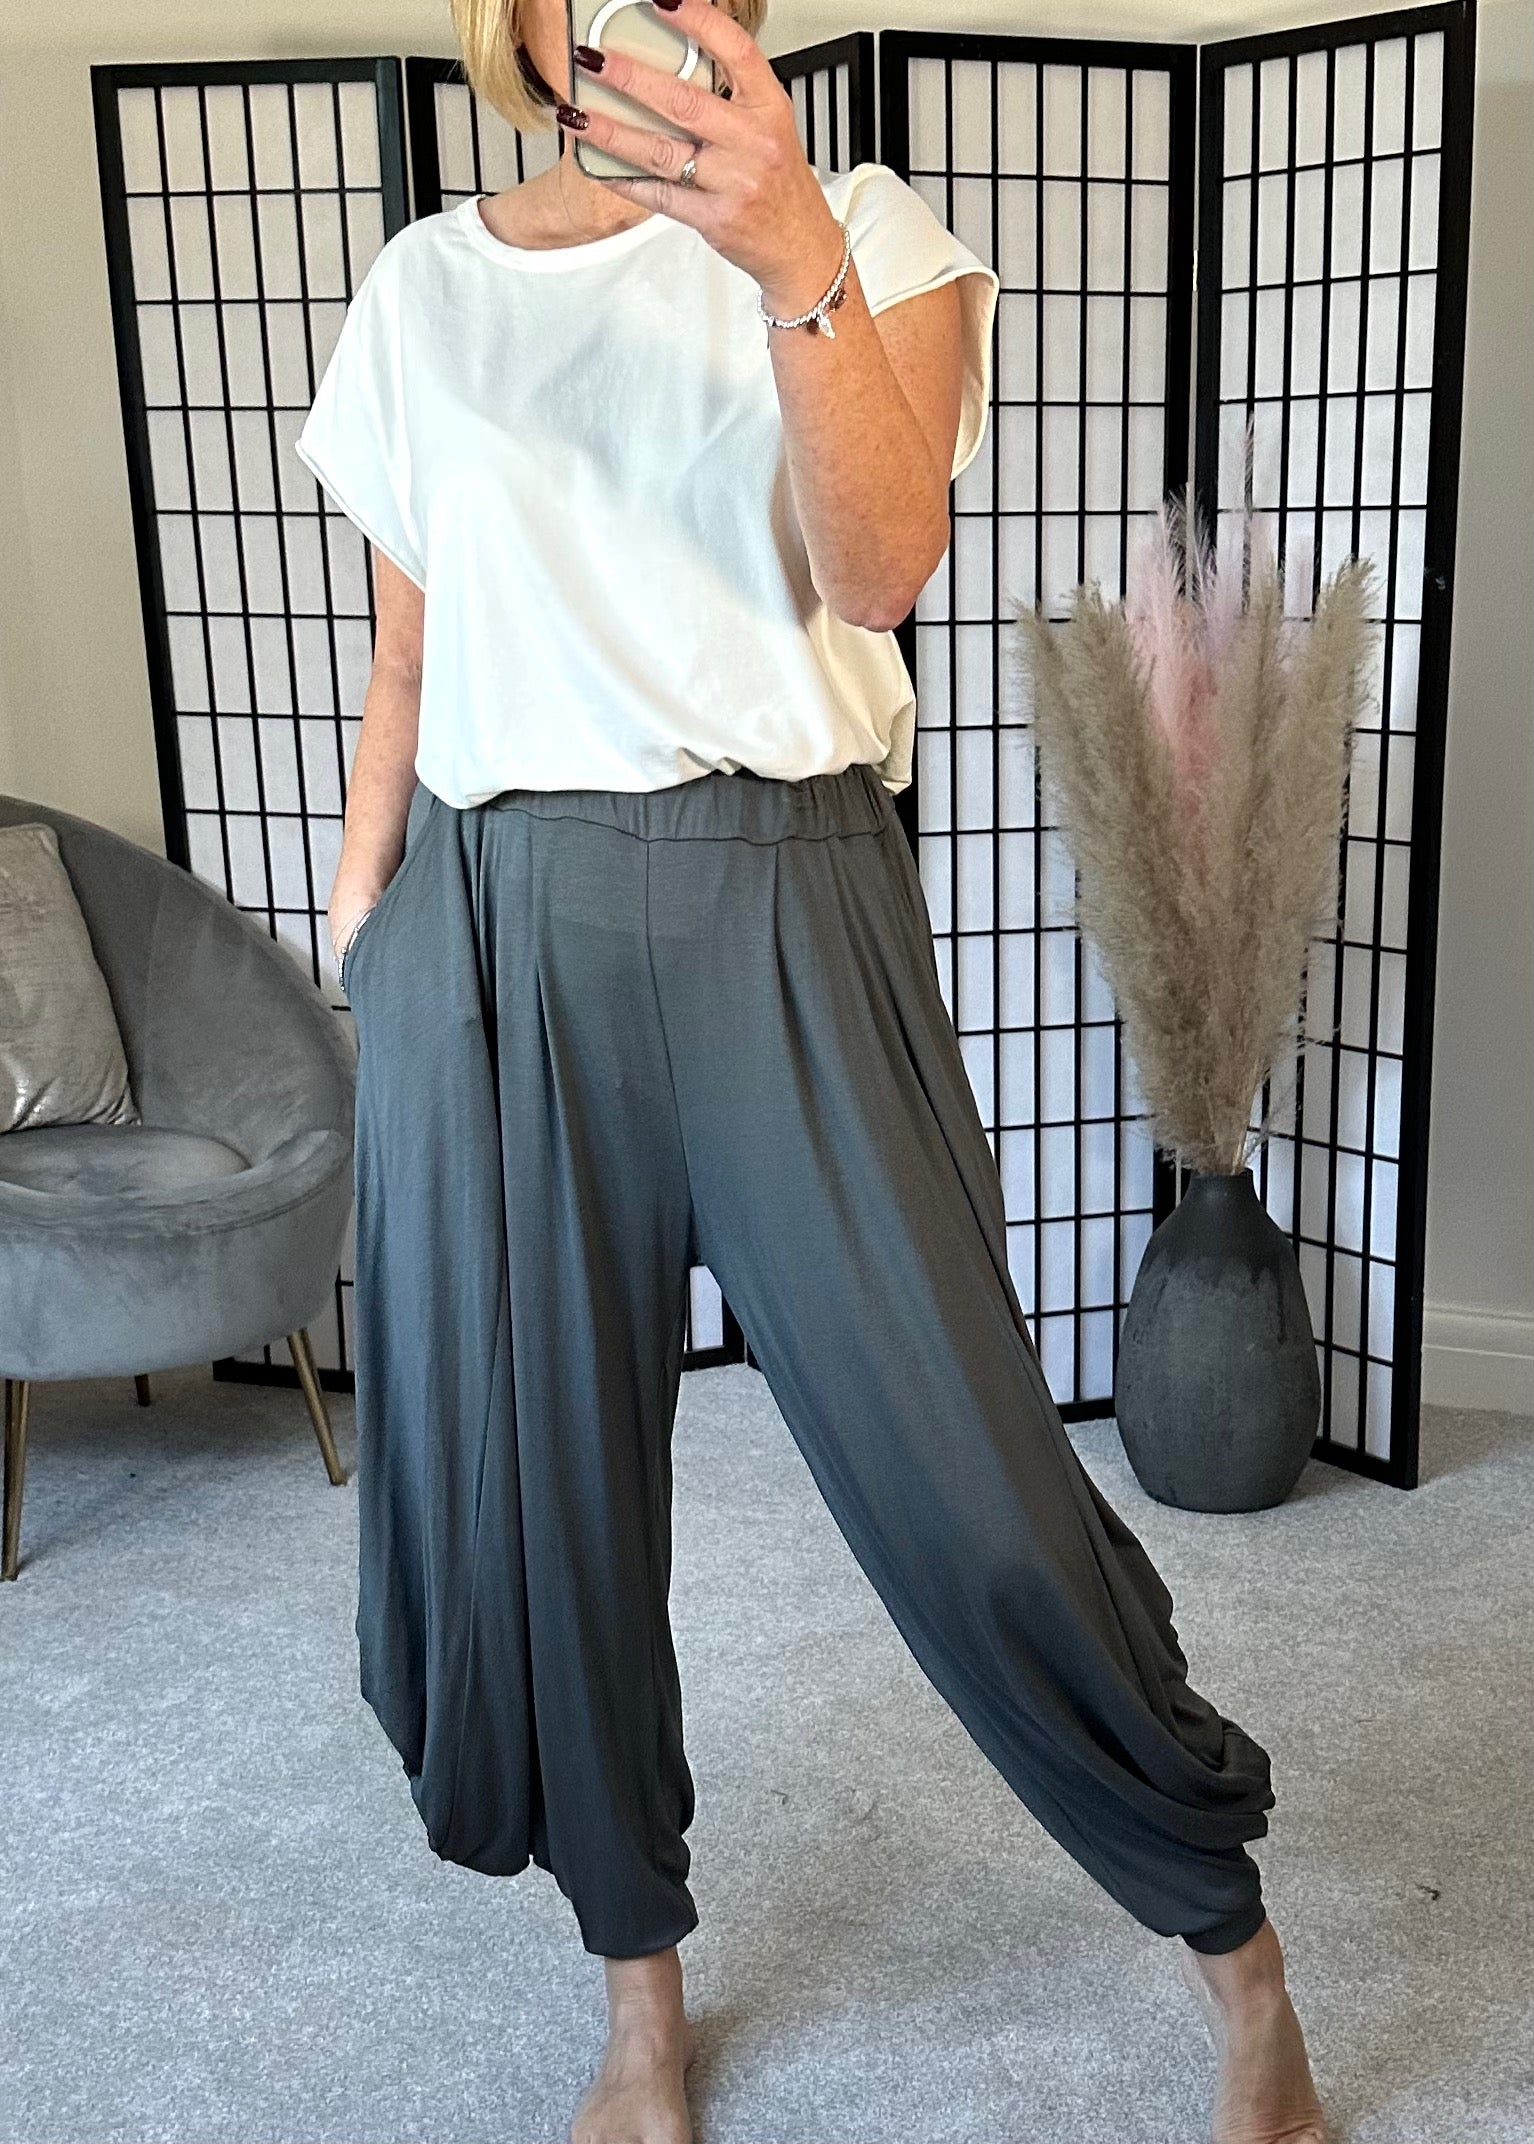 Shop New Look Womens Harem Trousers up to 70 Off  DealDoodle